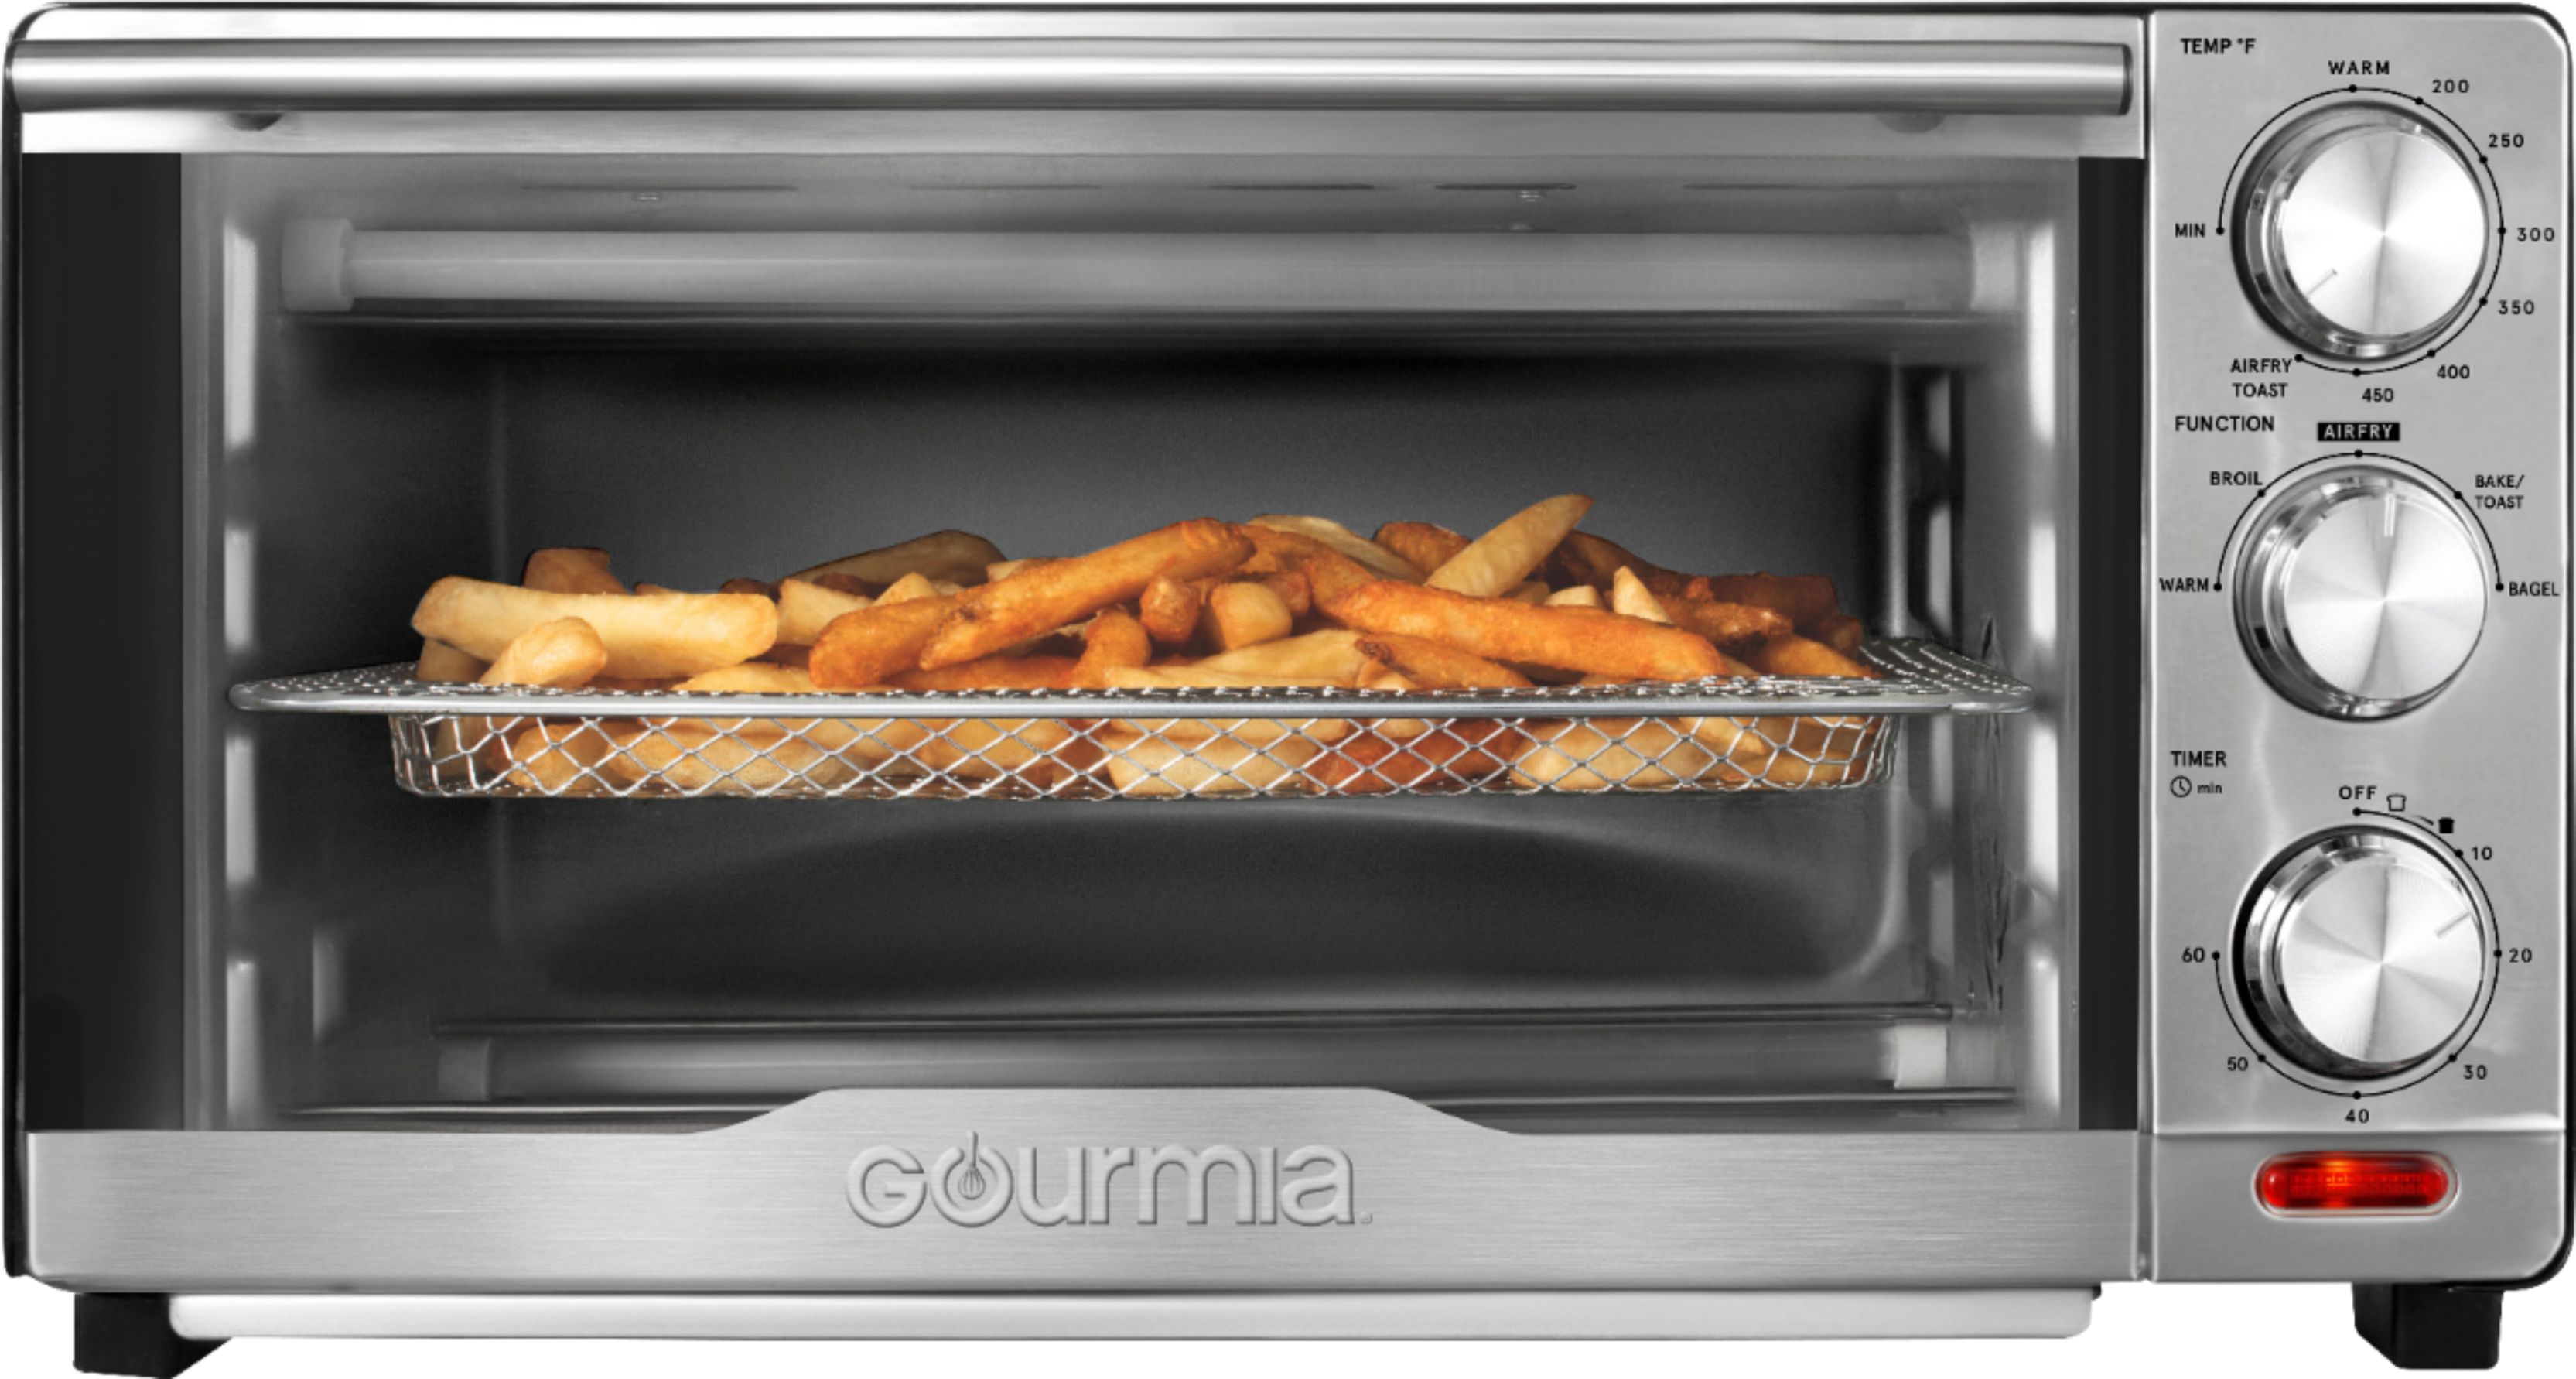 Best Buy: Gourmia Toaster Oven Stainless Steel GTF7350